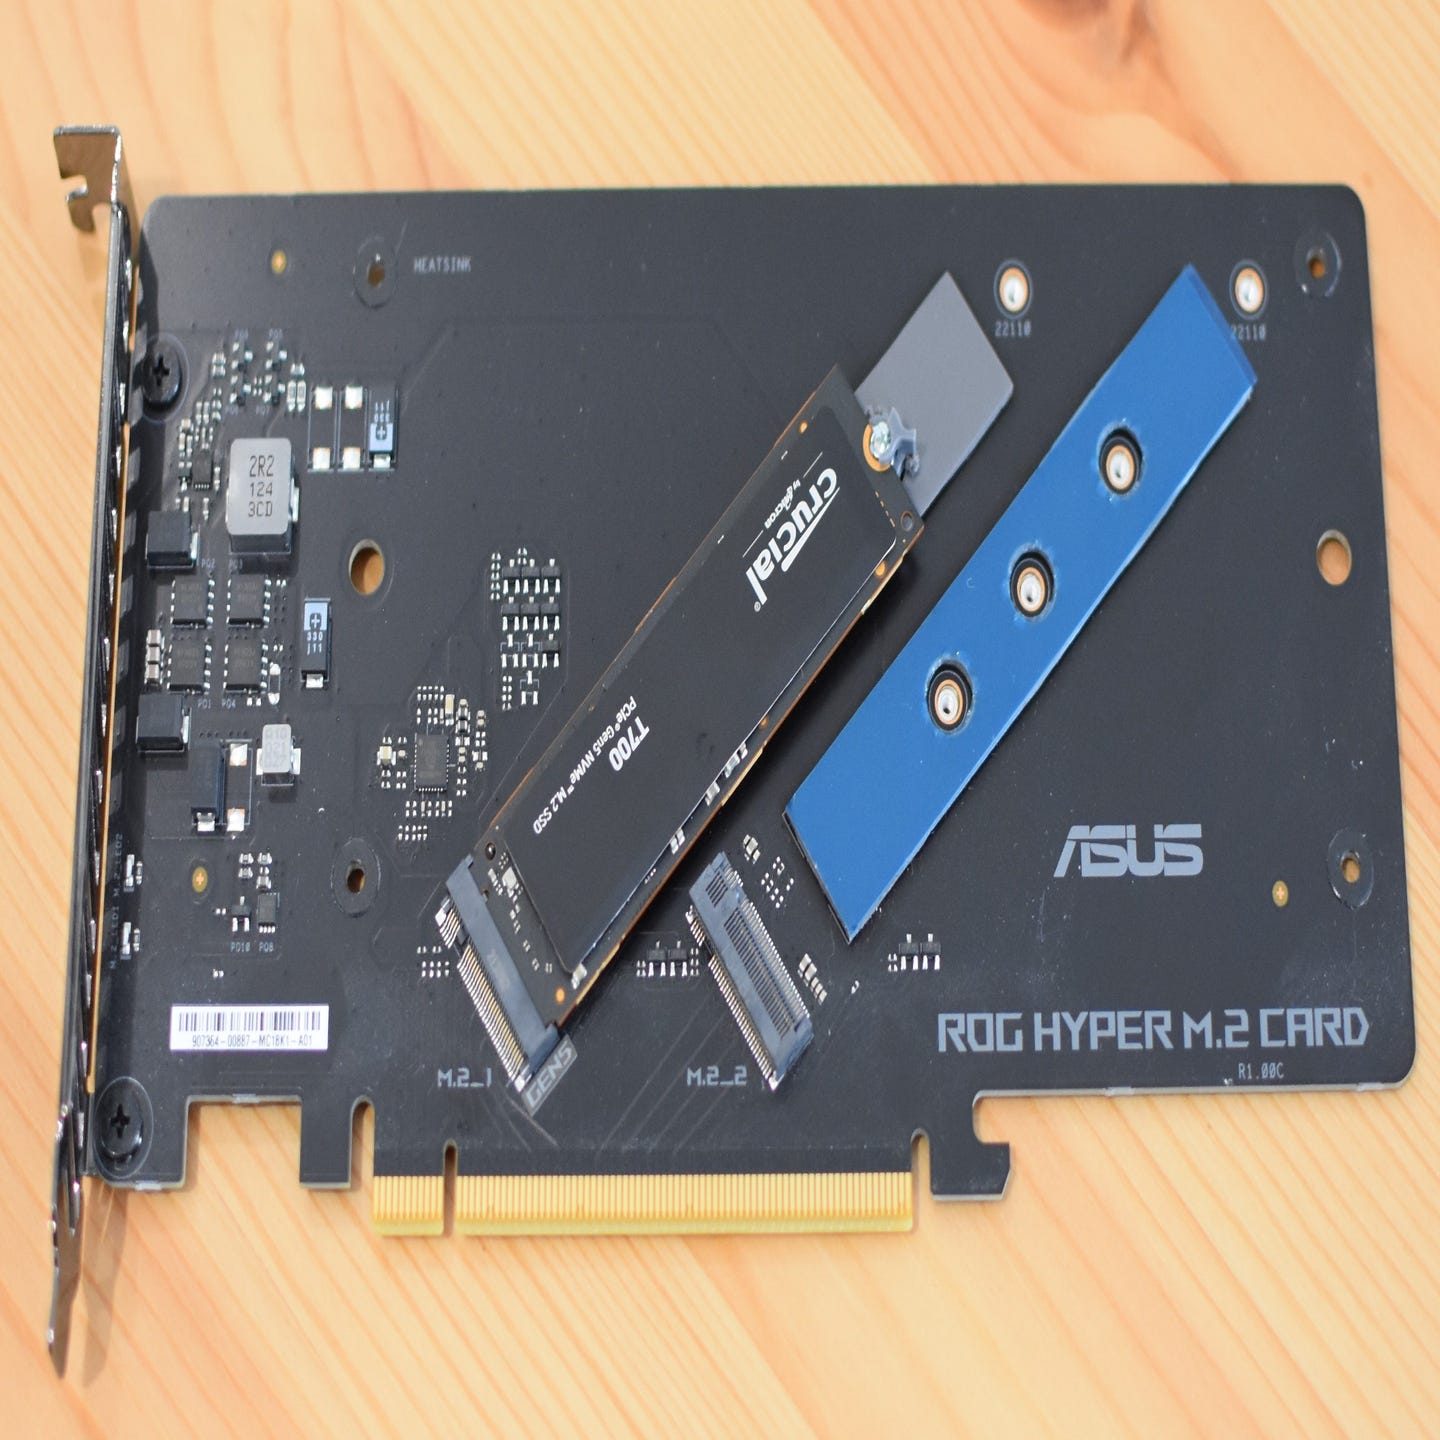 The first PCIe 5.0 M.2 SSD is available now